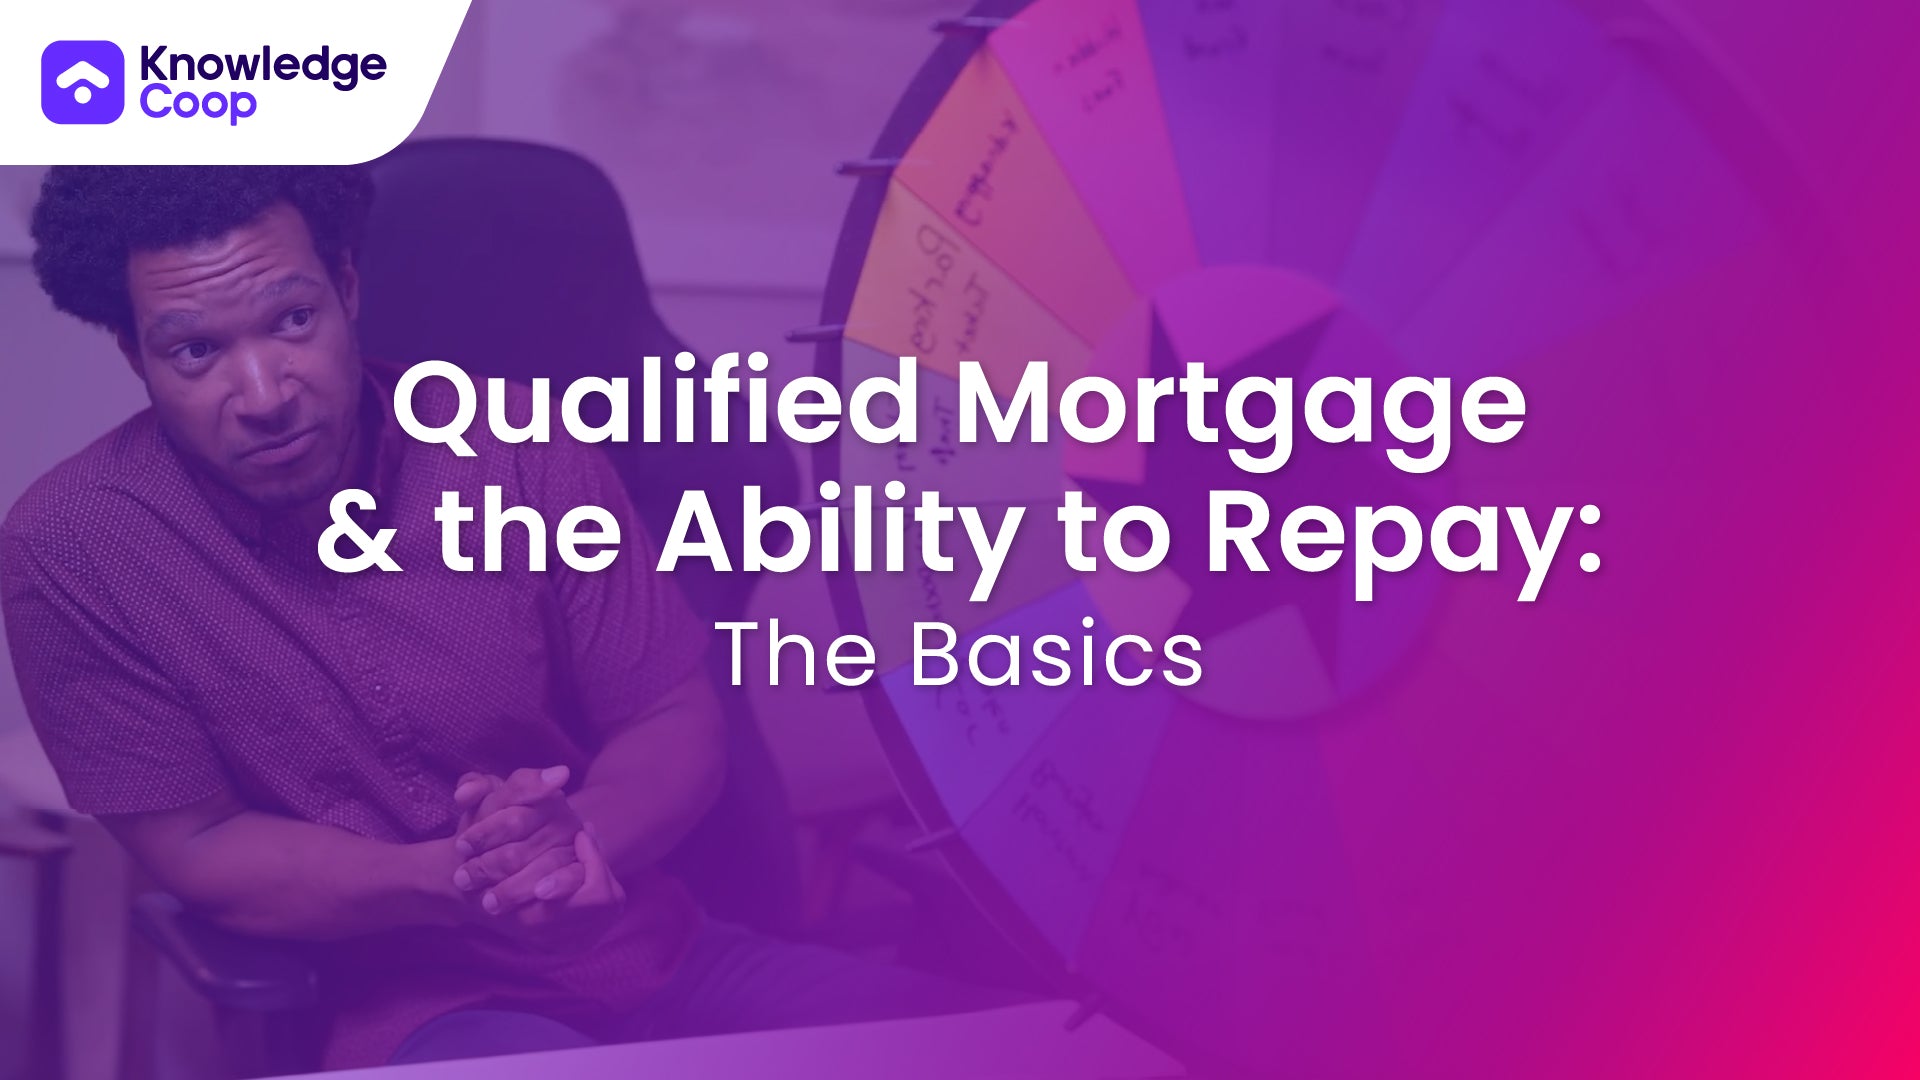 Qualified Mortgage and the Ability to Repay: The Basics